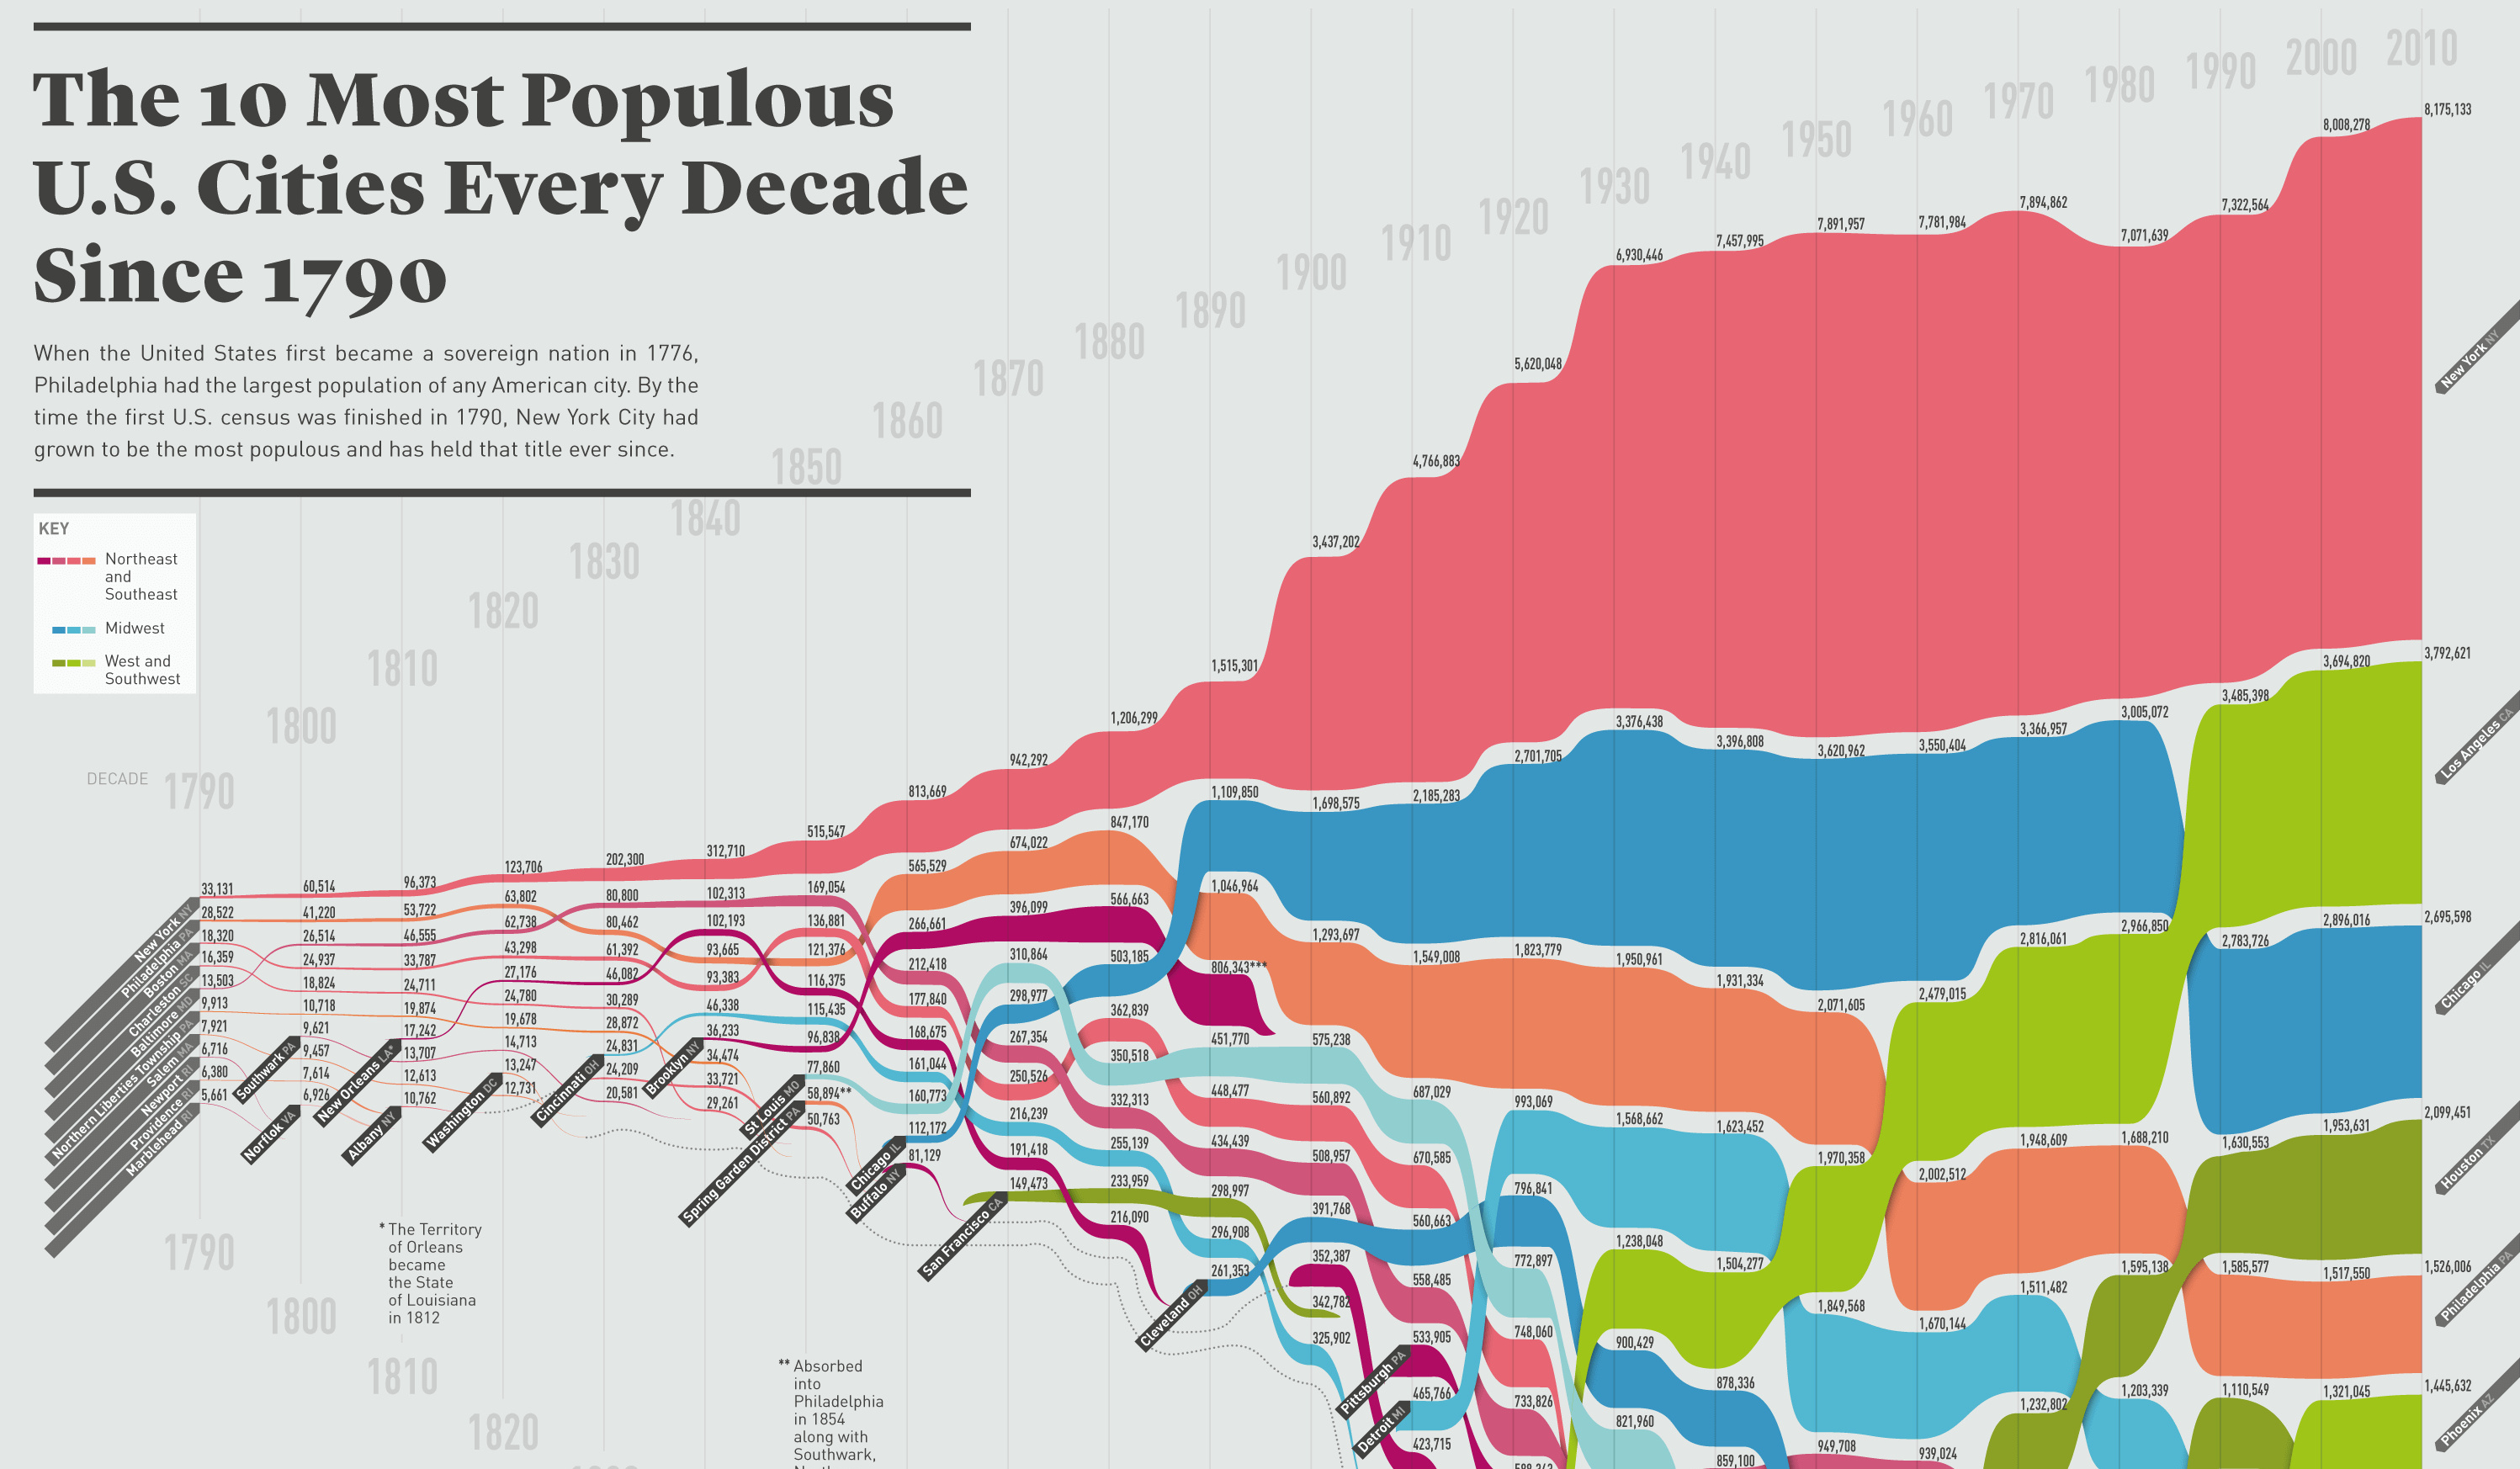 Infographic The 10 Most Populous U.S. Cities, Every Decade Since 1790